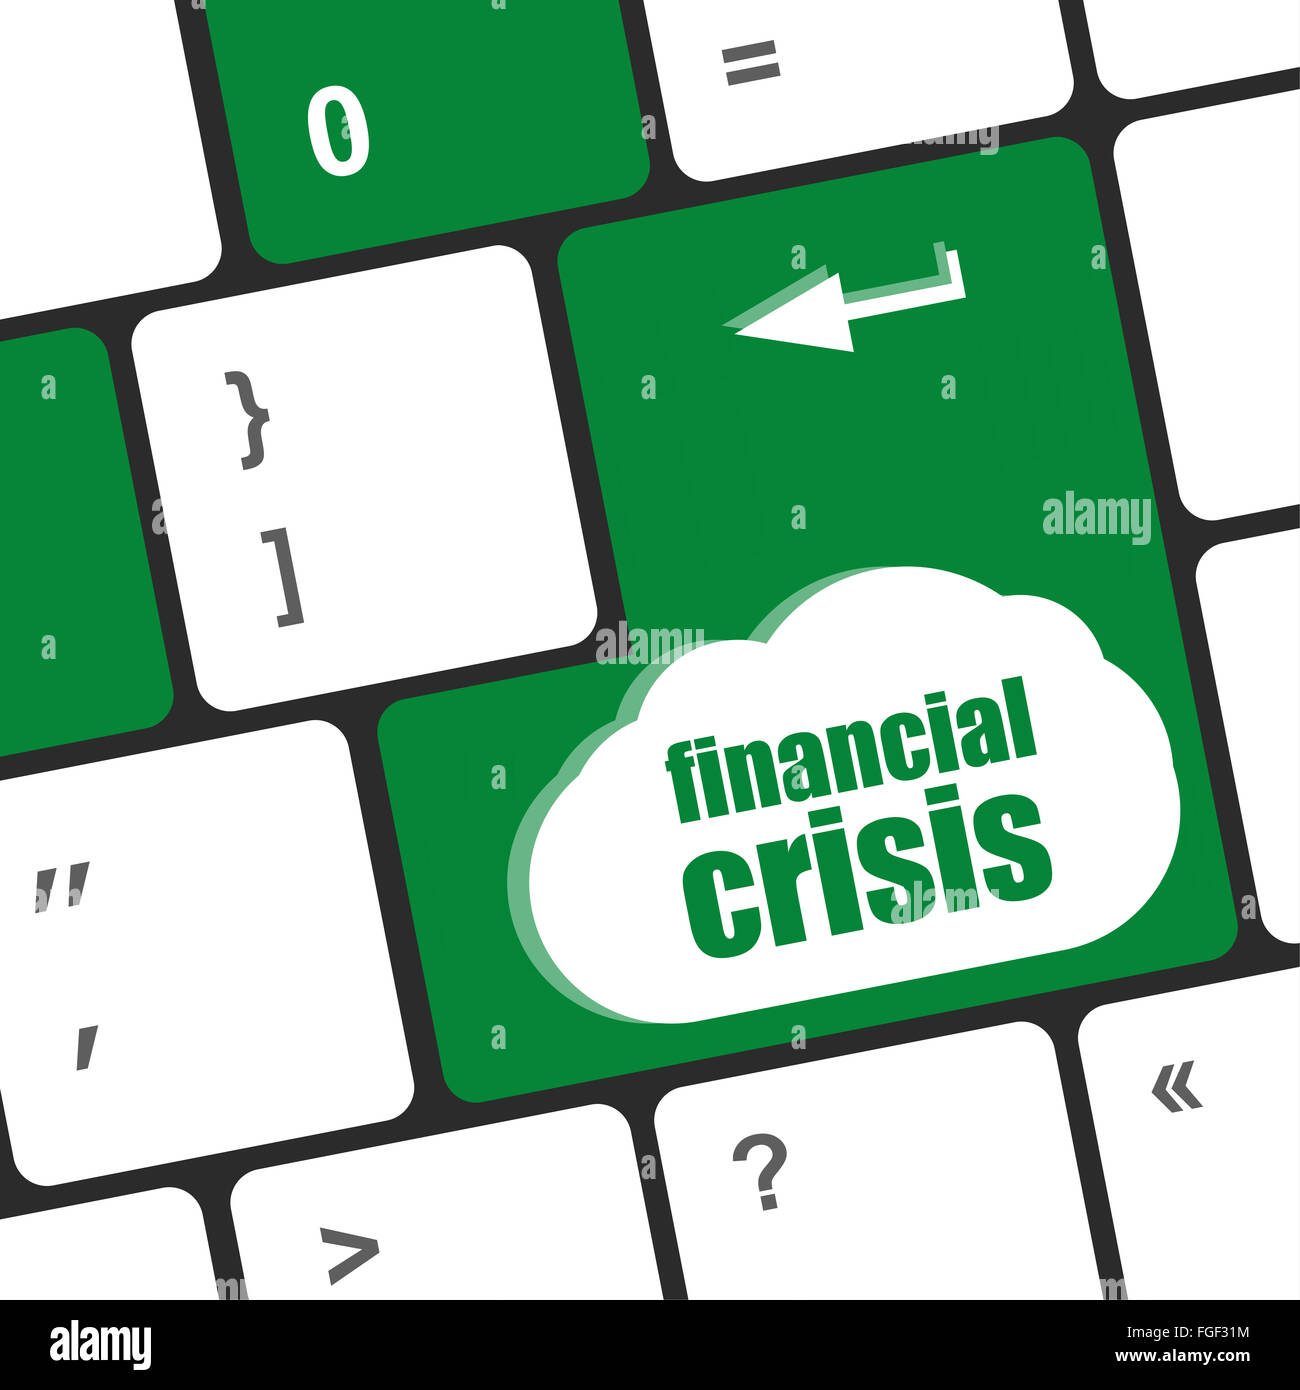 financial crisis key showing business insurance concept, business concept Stock Photo